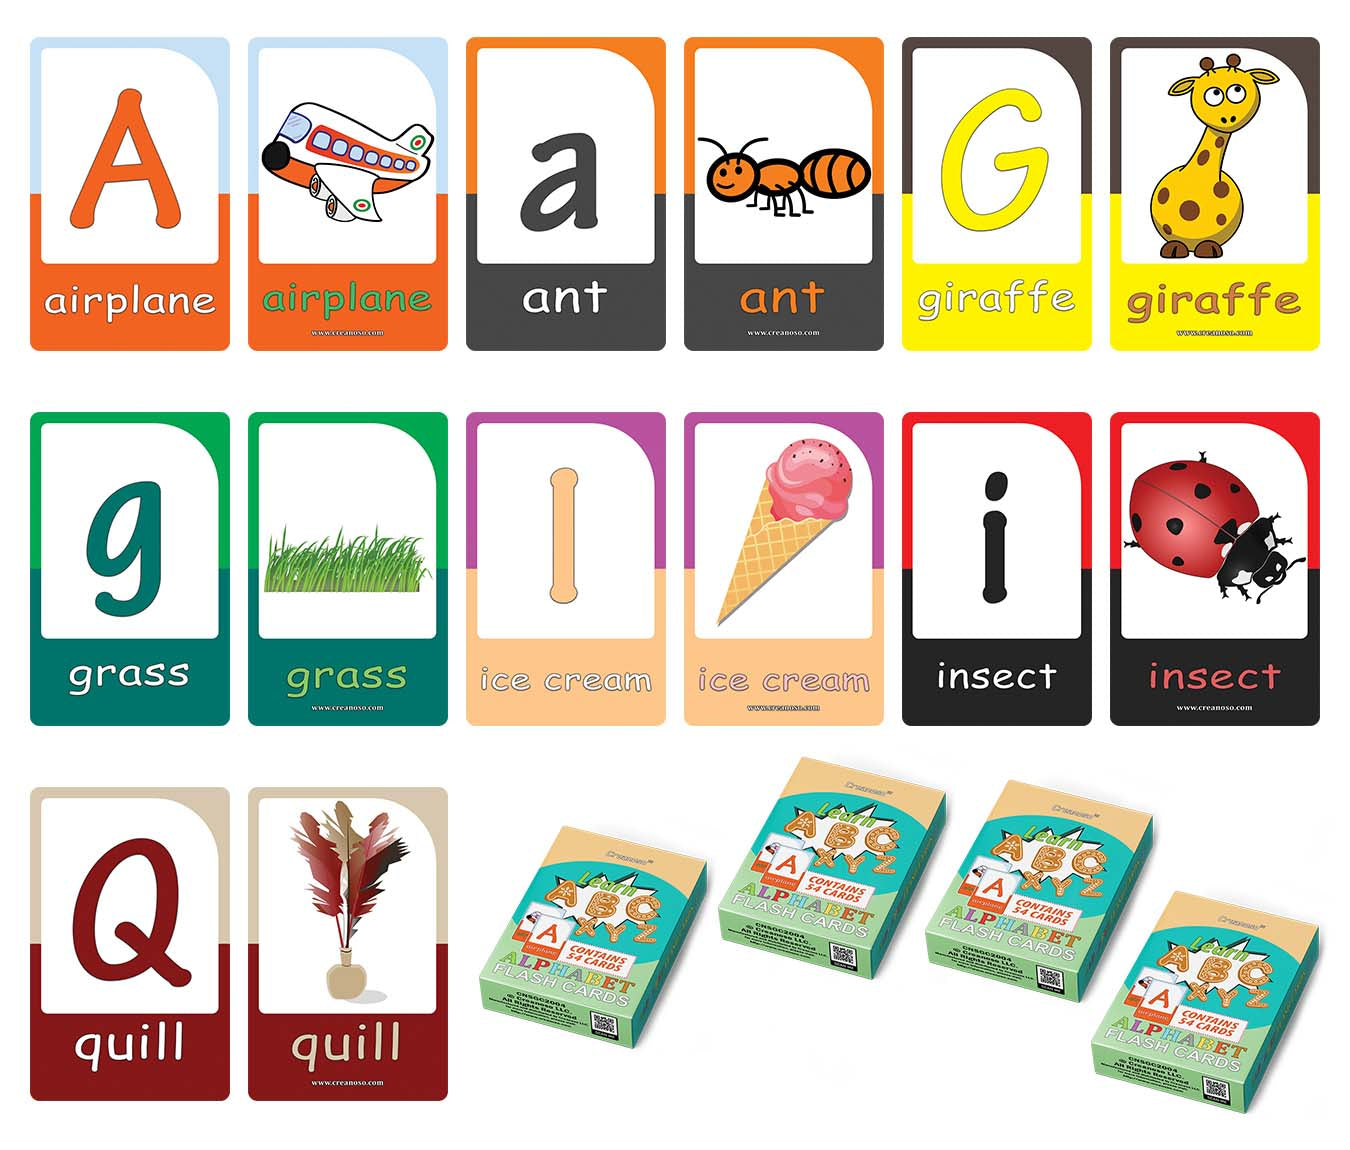 Alphabet High Quality Flash Cards for Kids (4-Deck) - Pretty Favors Decor Decal Supply - Stocking Stuffers Gifts for Boys Girls Christmas Holidays Activities - Party Theme DIY Collection Set for Boys